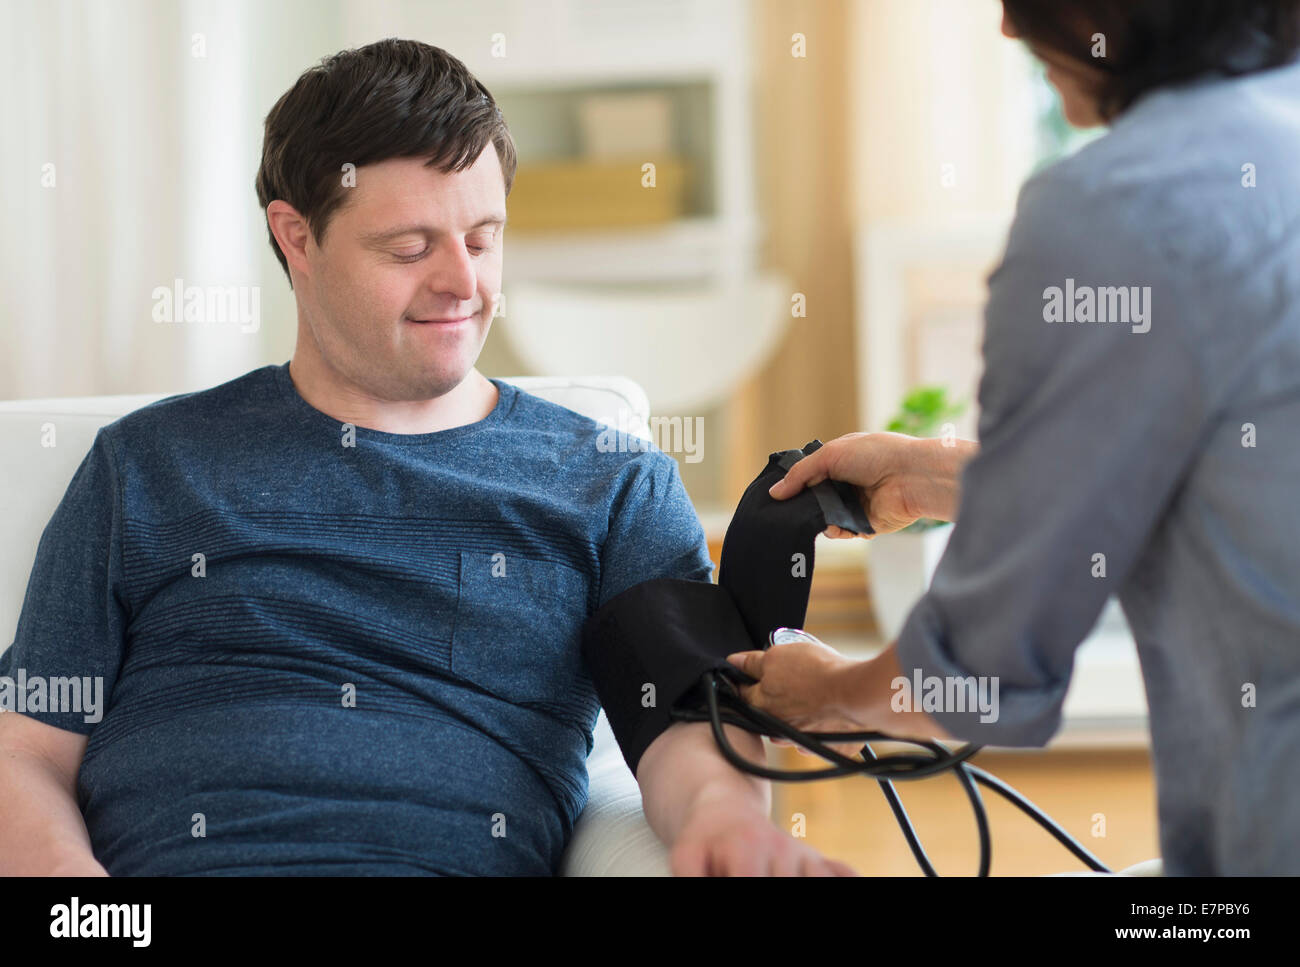 Man with down syndrome having blood pressure measured Stock Photo